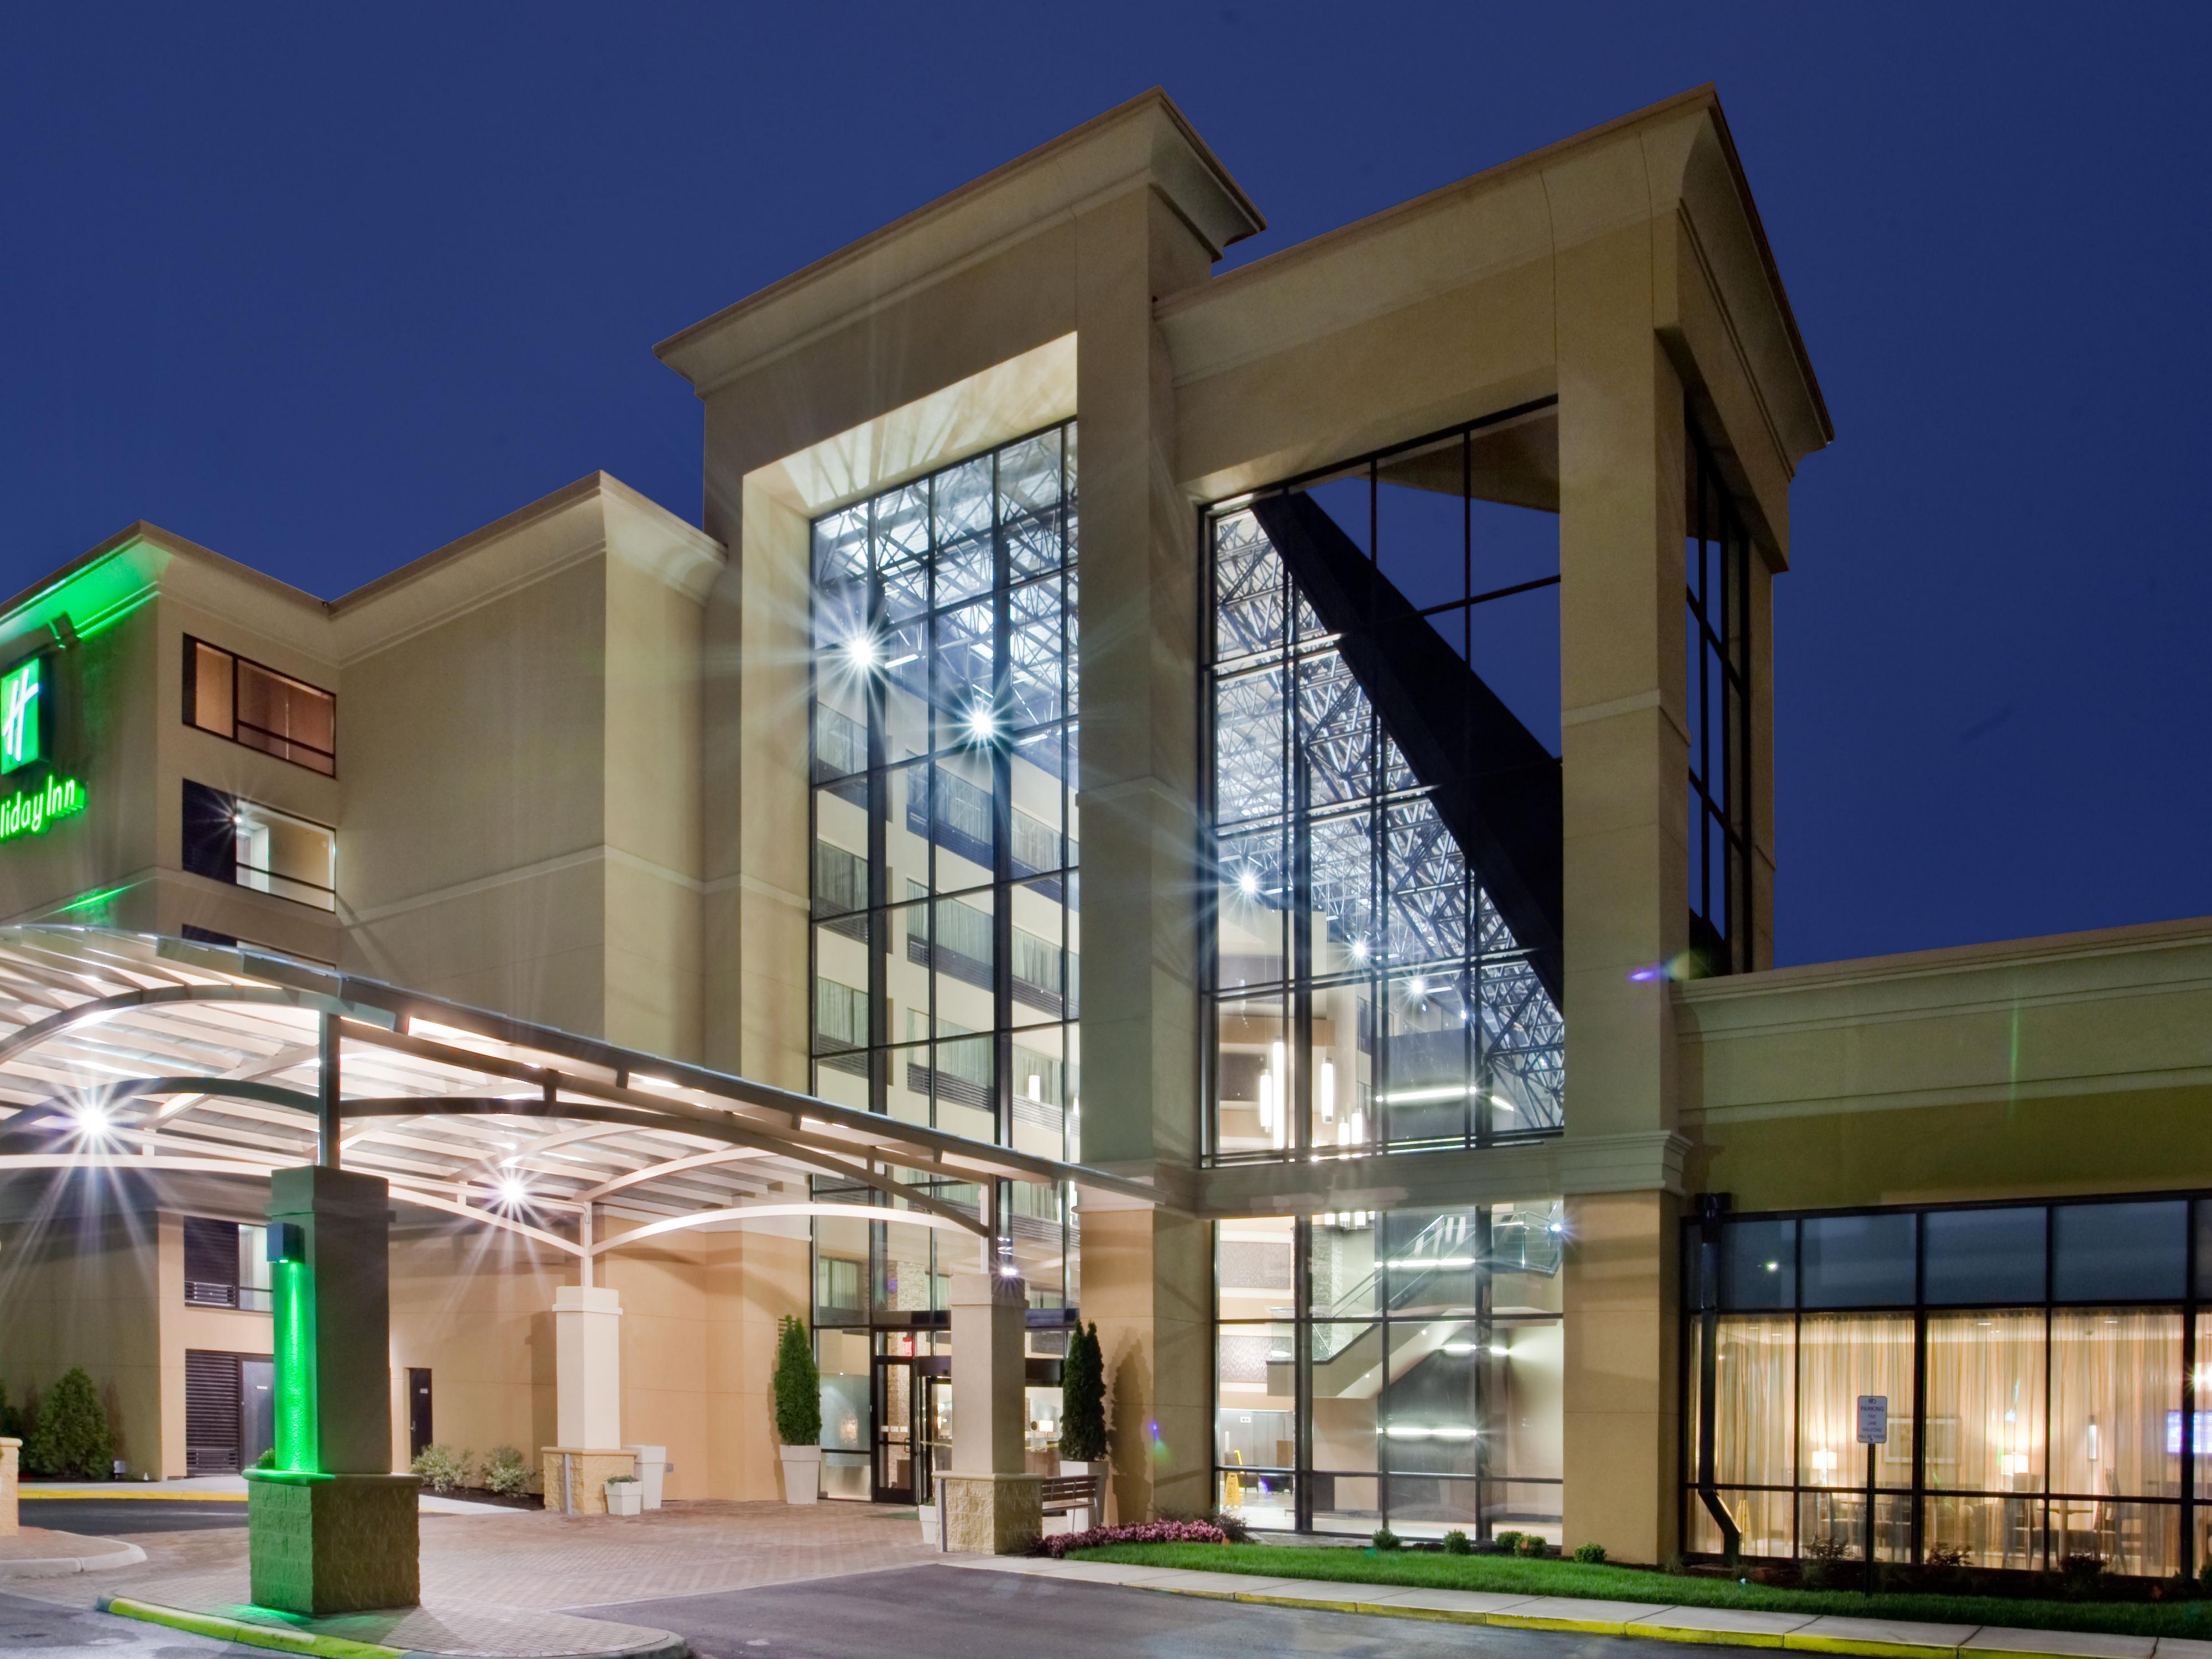 The Holiday Inn Virginia Beach - Norfolk is within 10 minutes to many of the Military Bases including Norfolk Naval Base, Little Creek, Oceana, Dam Neck, Fort Story, Camp Pendleton, SACT NATO,  Colonna’s and GD NASSCO Shipyards.